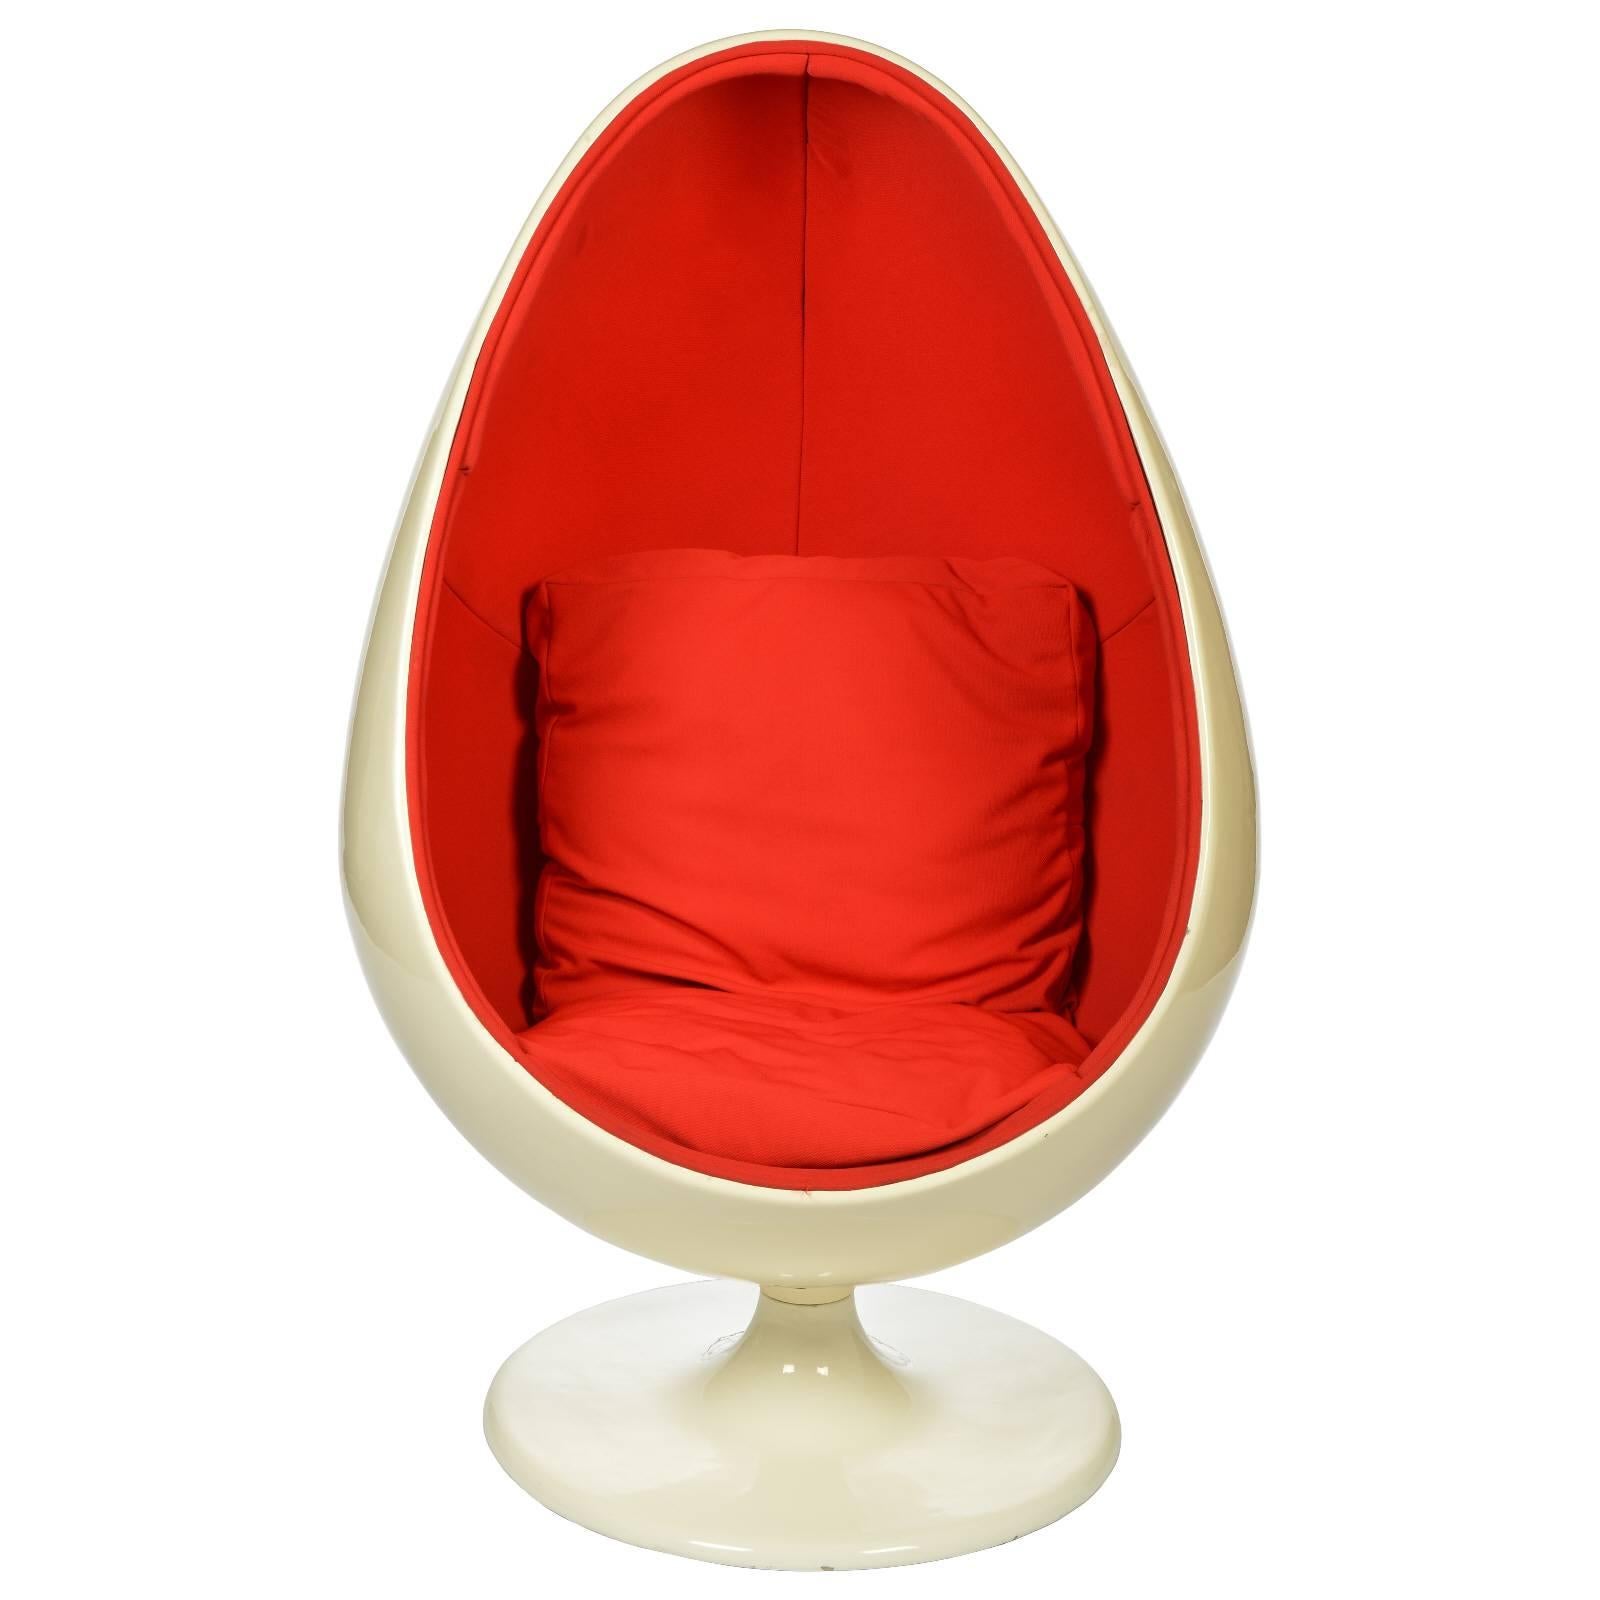 Classic Mid Century Modern Pod Chair or Egg Chair For Sale